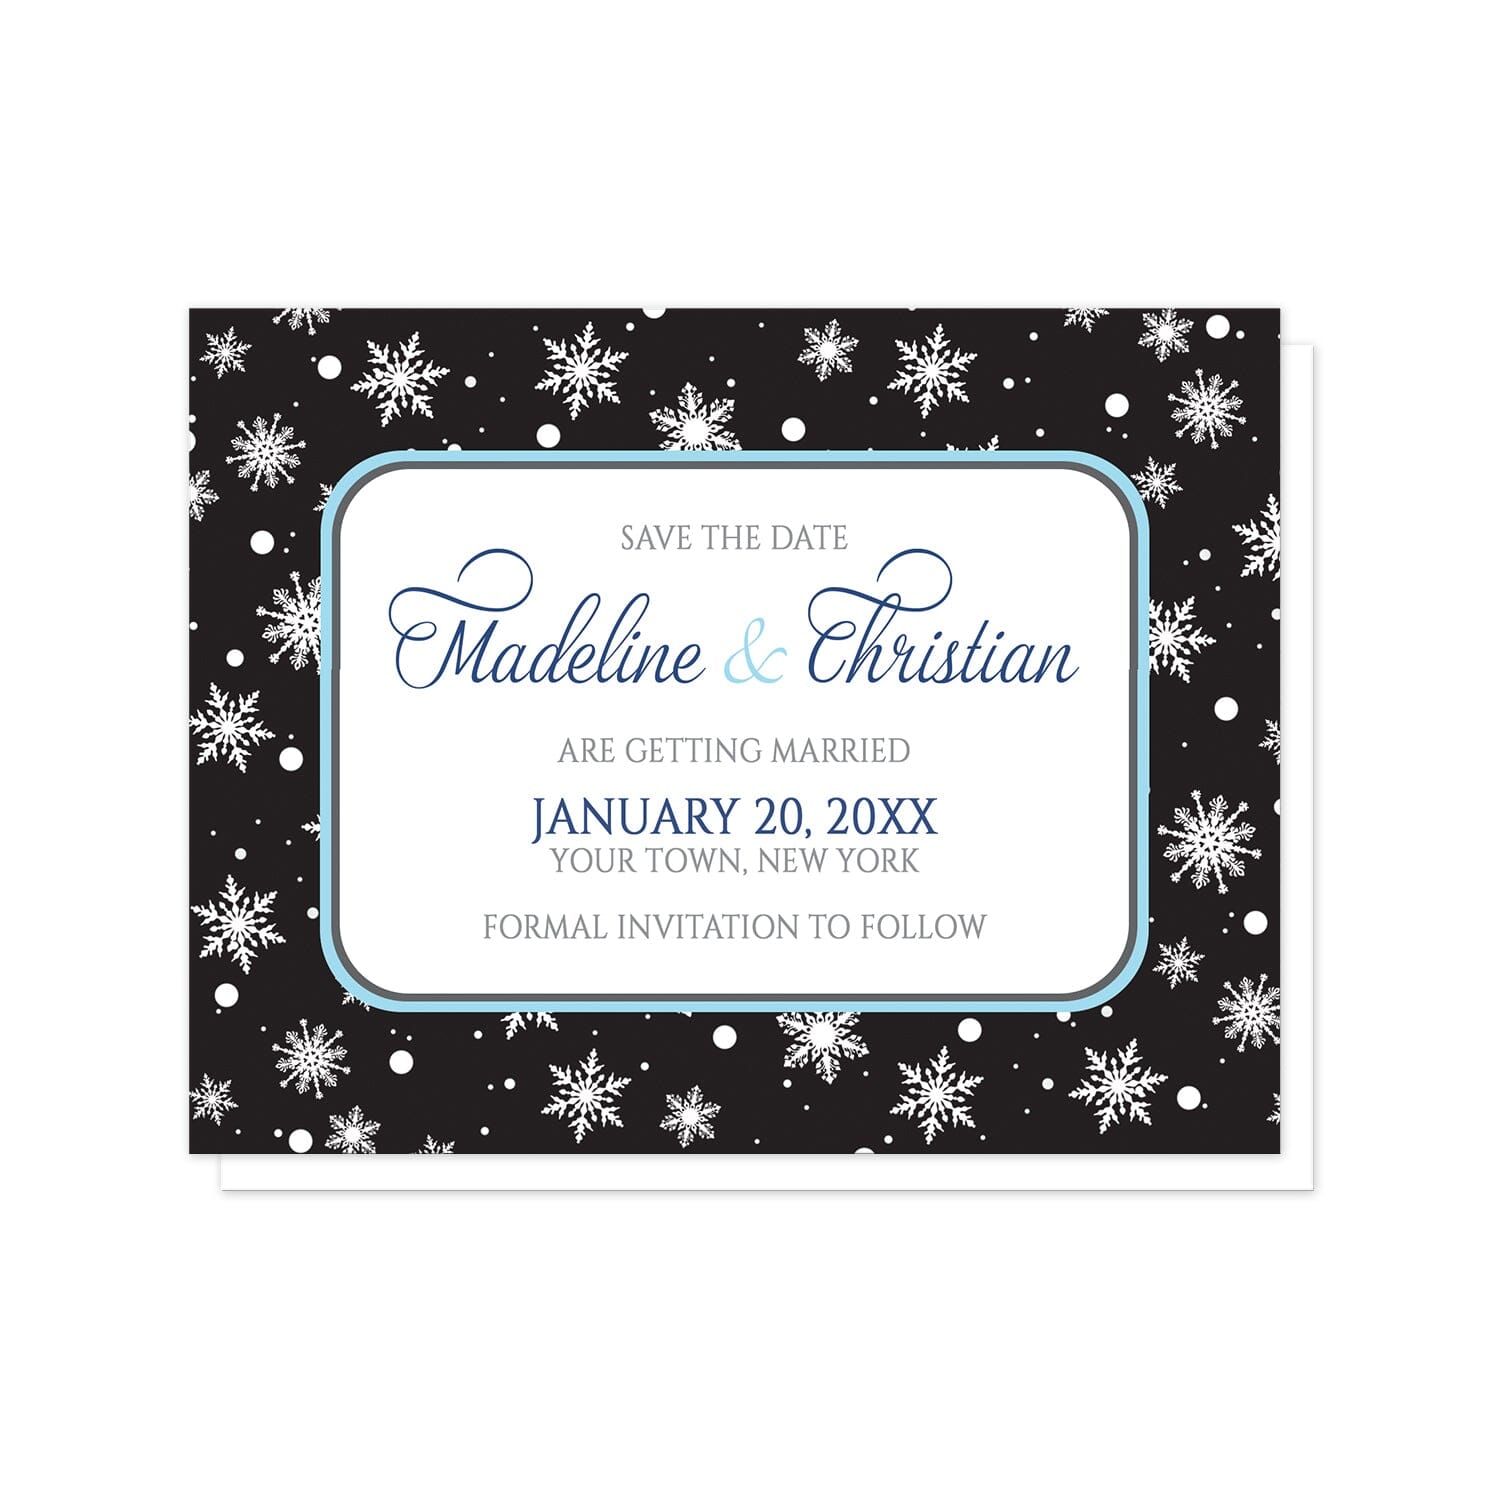 Midnight Snowflake Winter Save the Date Cards at Artistically Invited. Midnight snowflake winter save the date cards with white snowflakes over a black background. Your personalized wedding date announcement details are custom printed in navy blue, aqua blue, and medium gray over a white rectangular area outlined in aqua and navy blue.